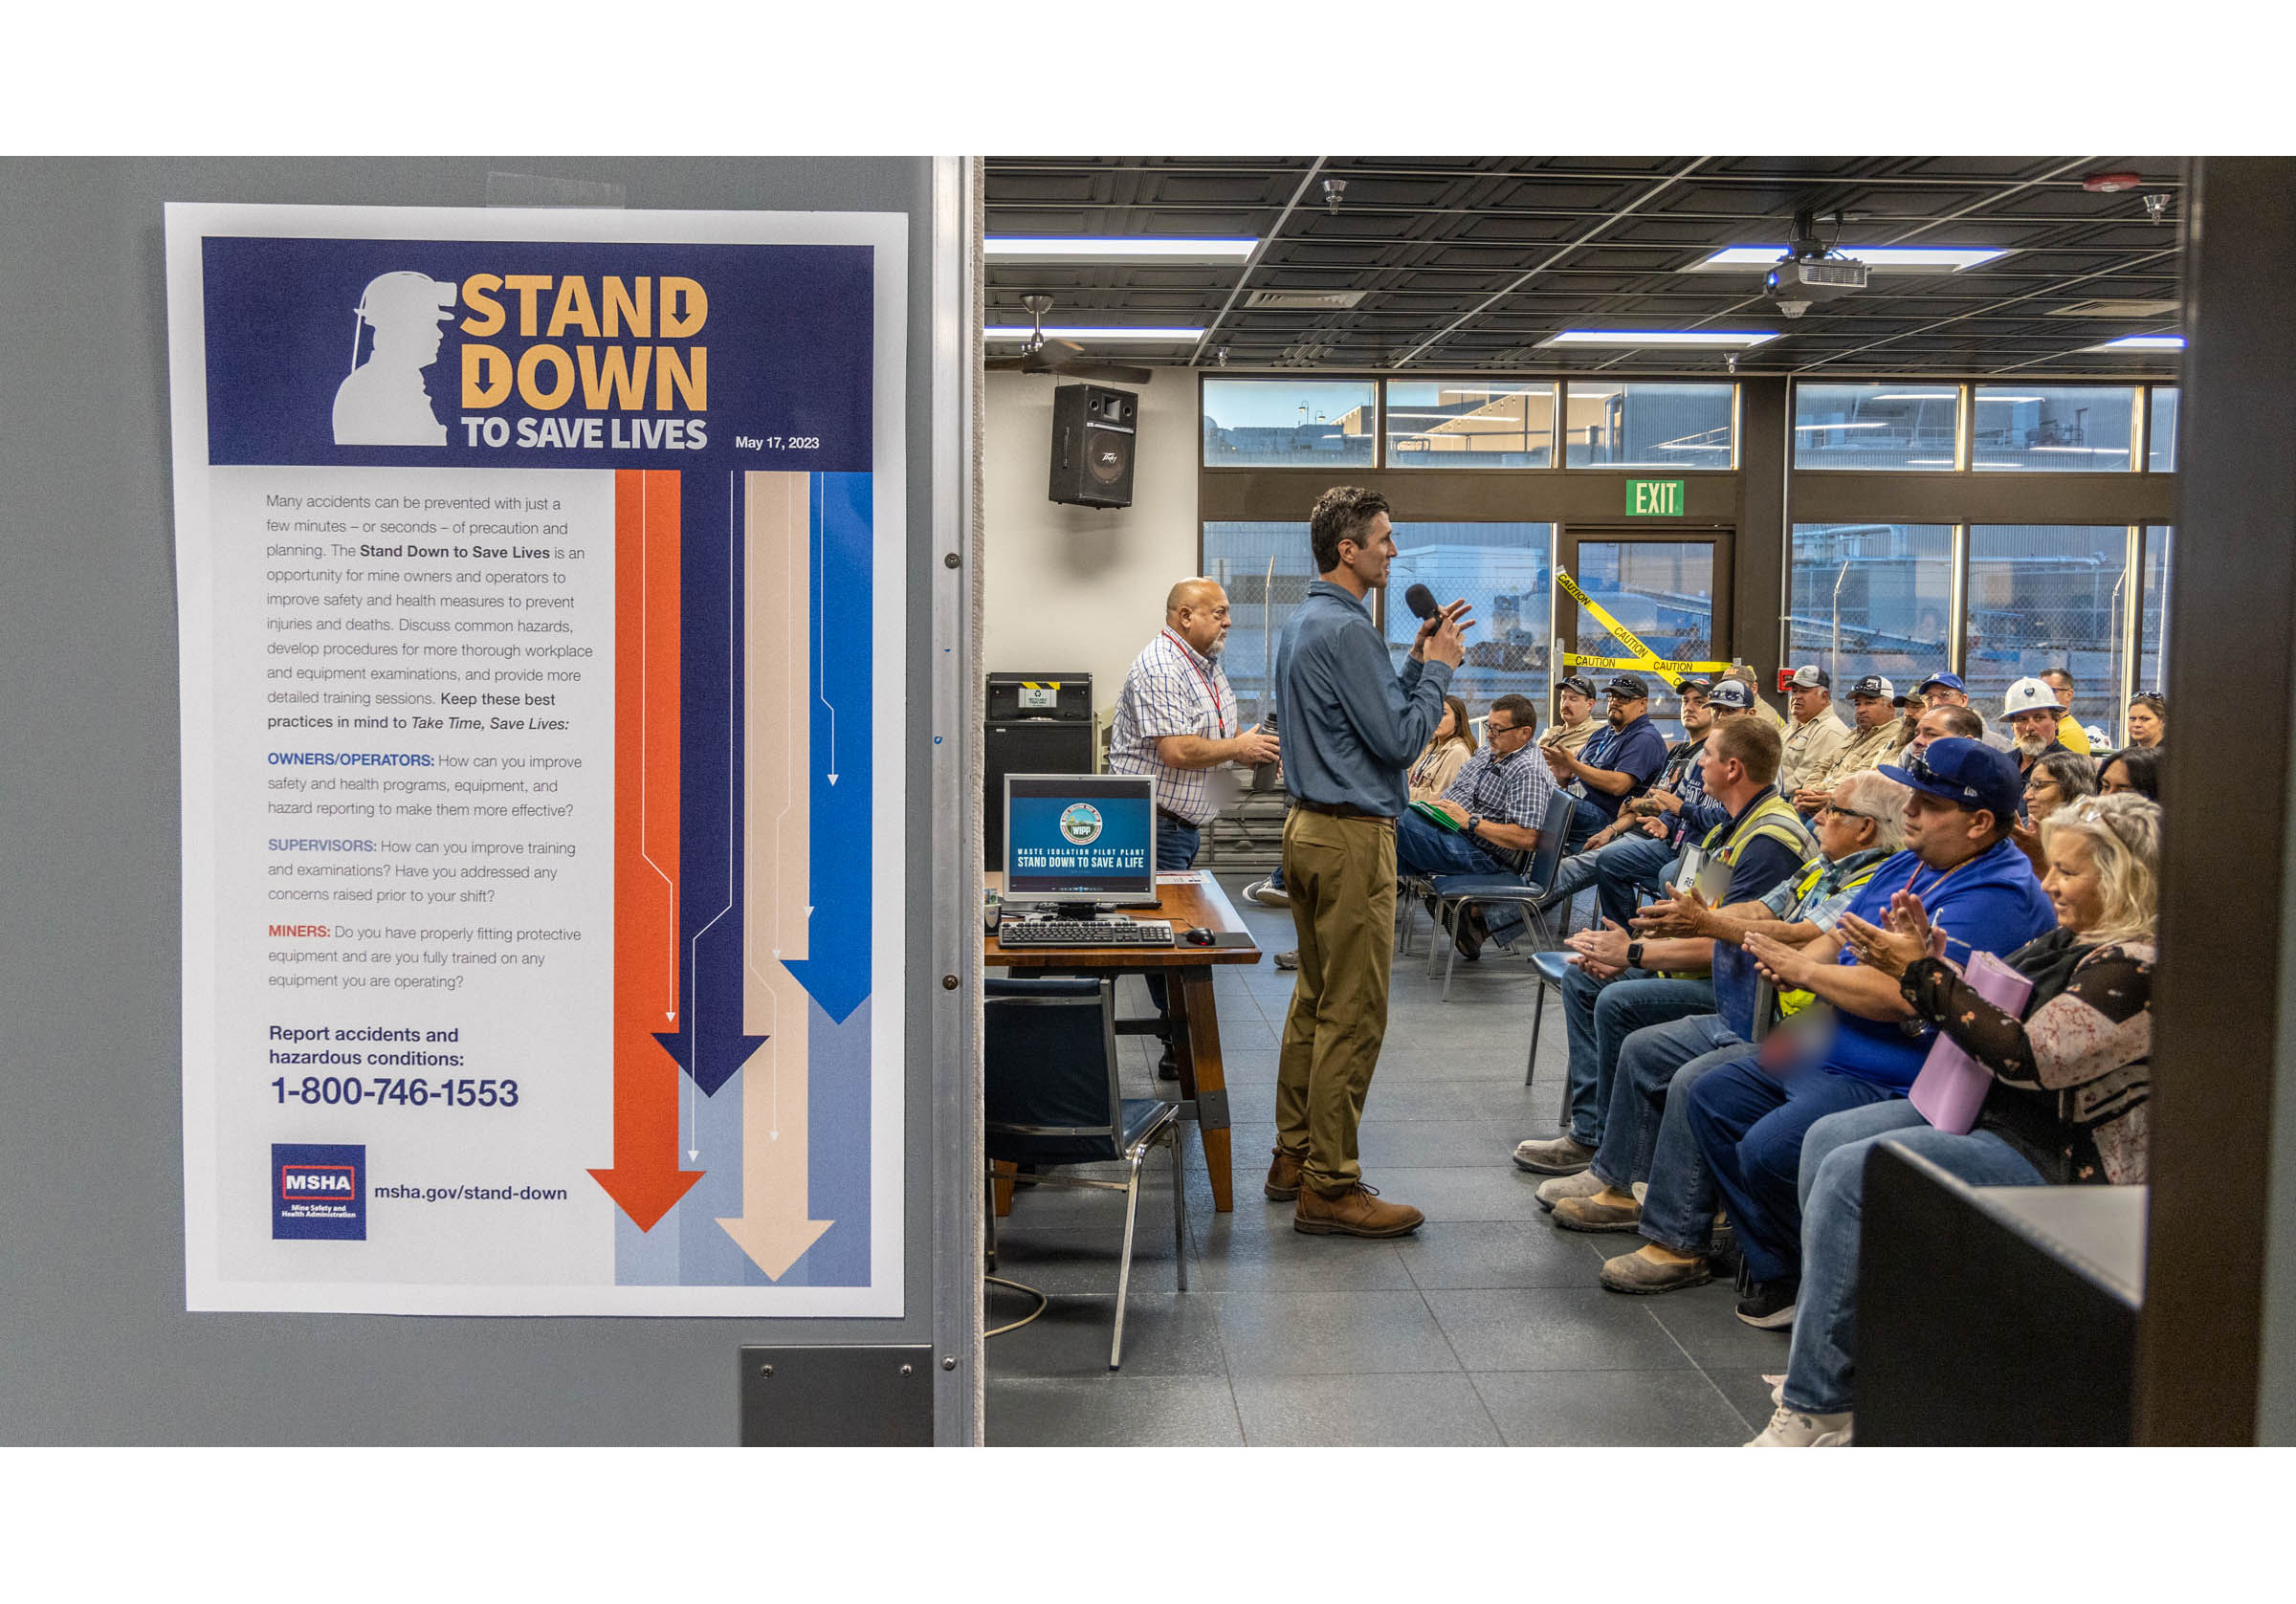 Presentation on safety on Stand Down Day